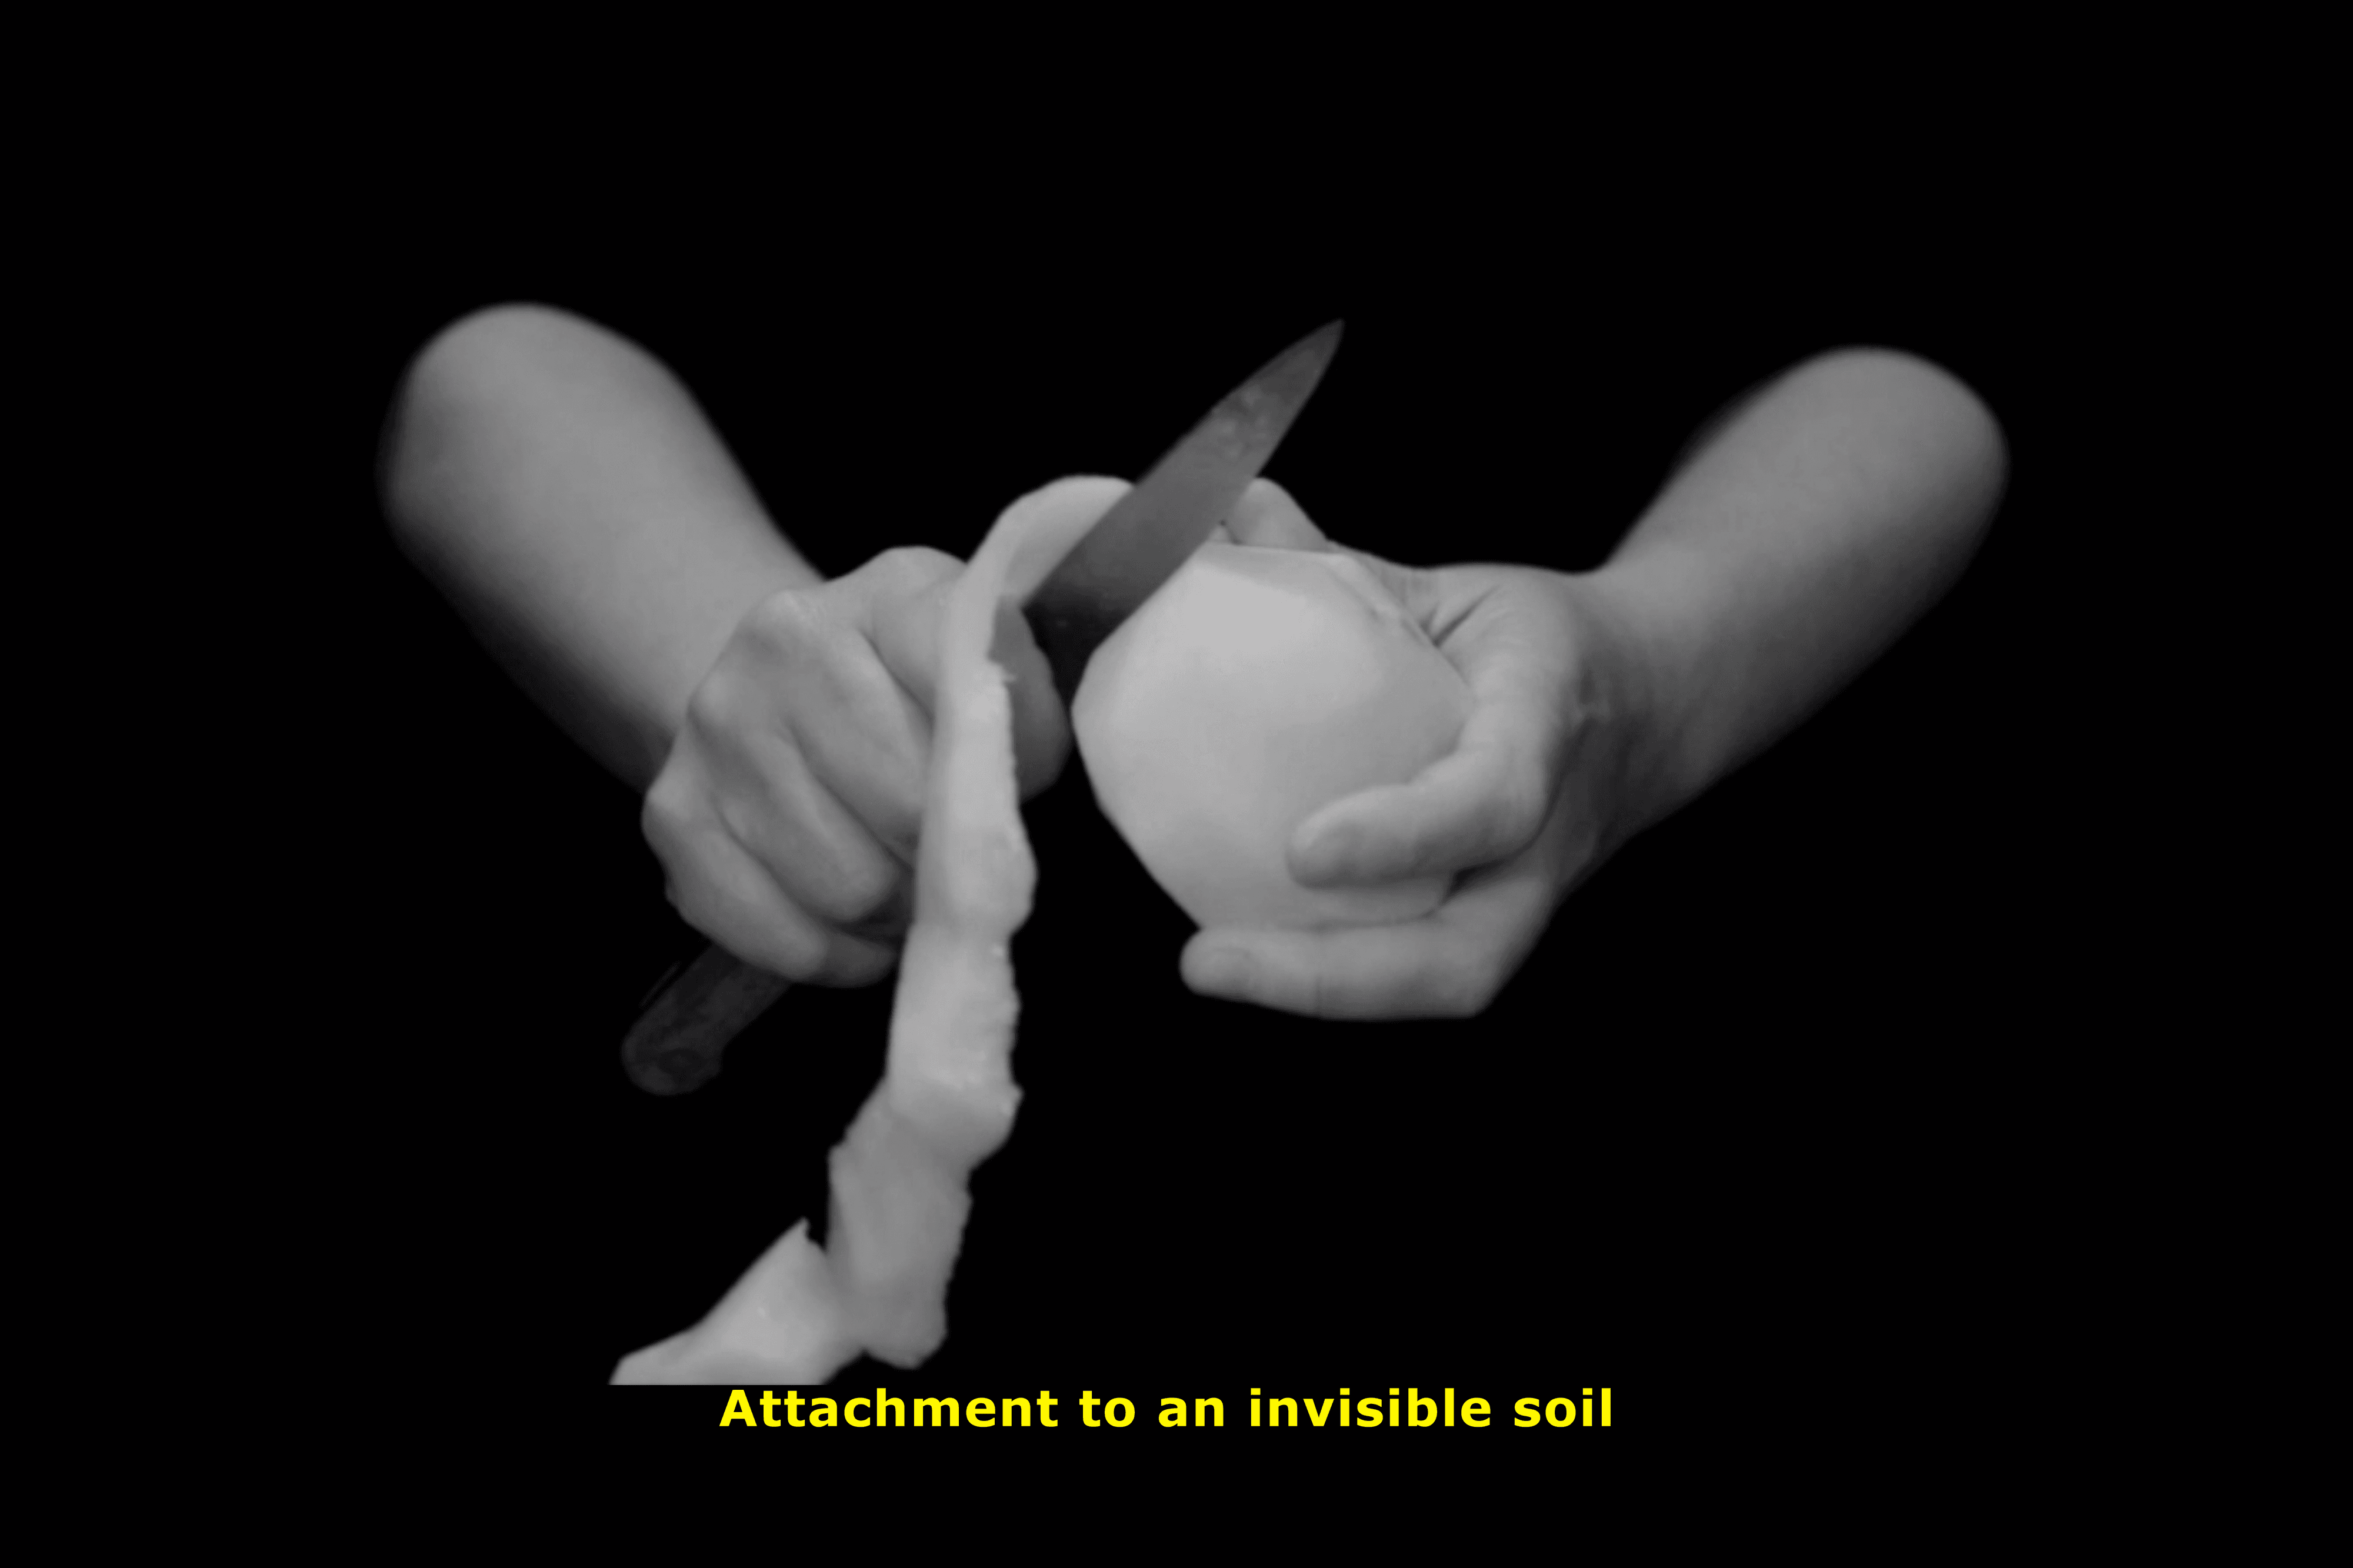 Attachment to an invisible soil